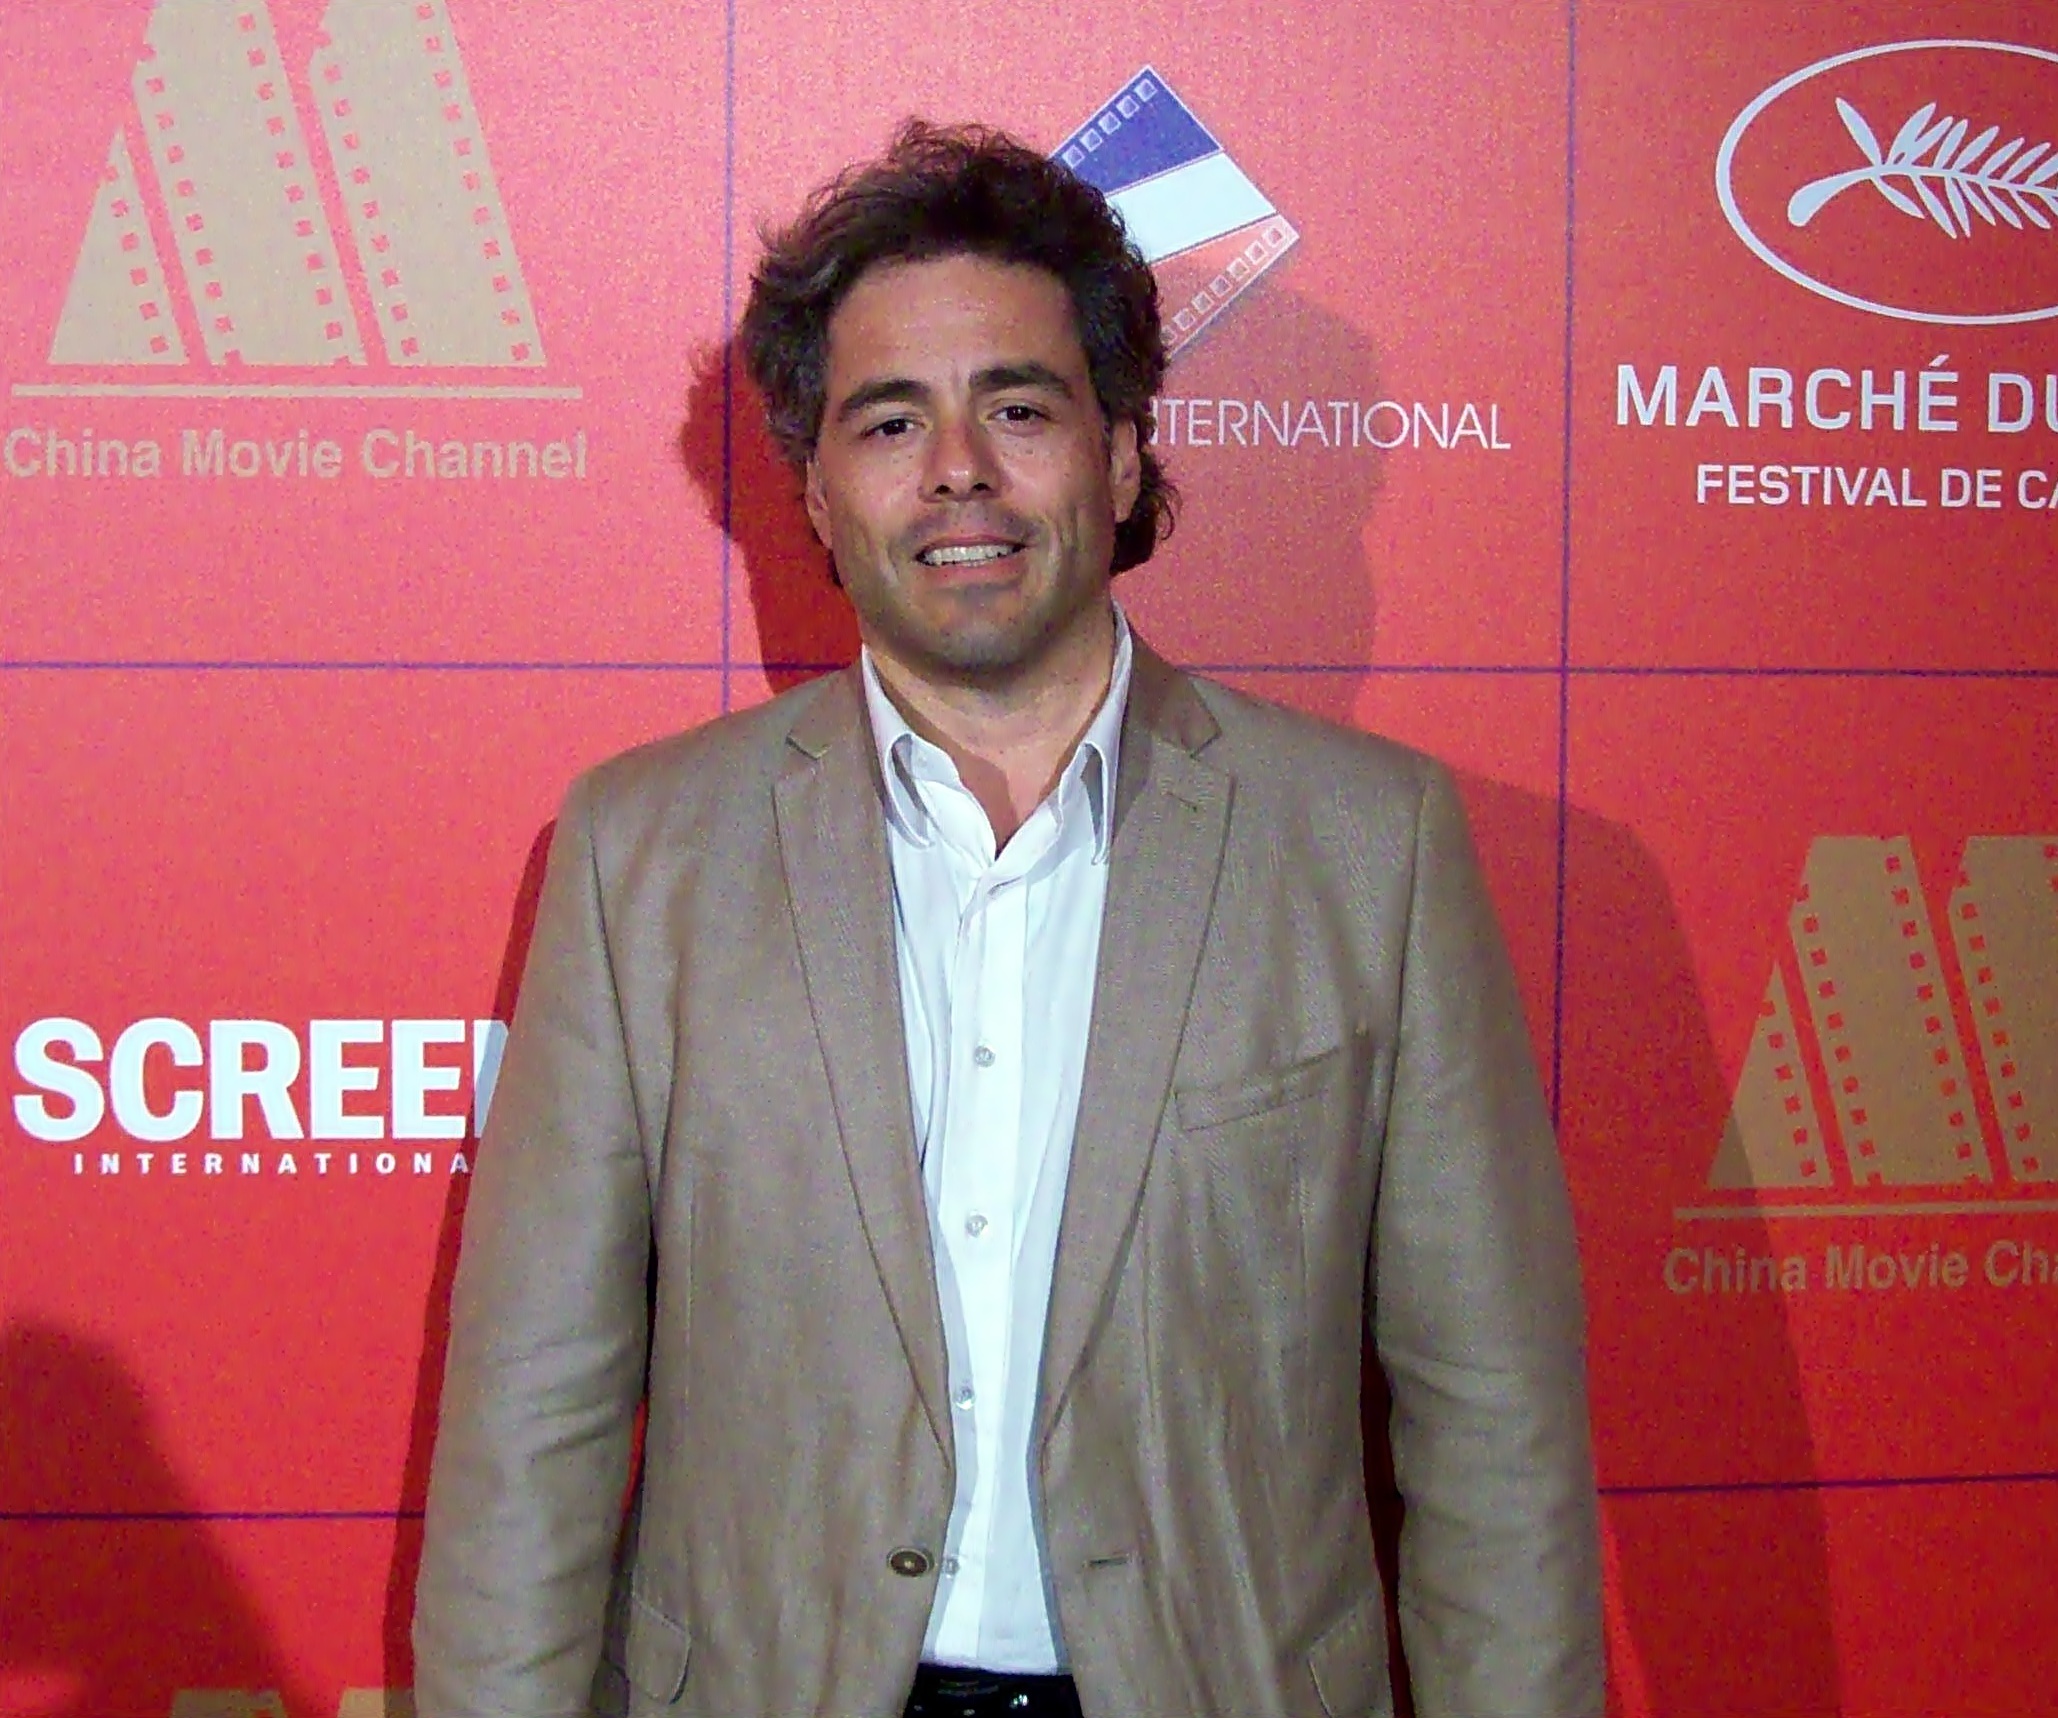 Michael A. Calace at China Film Night - Cannes Film Festival 2013